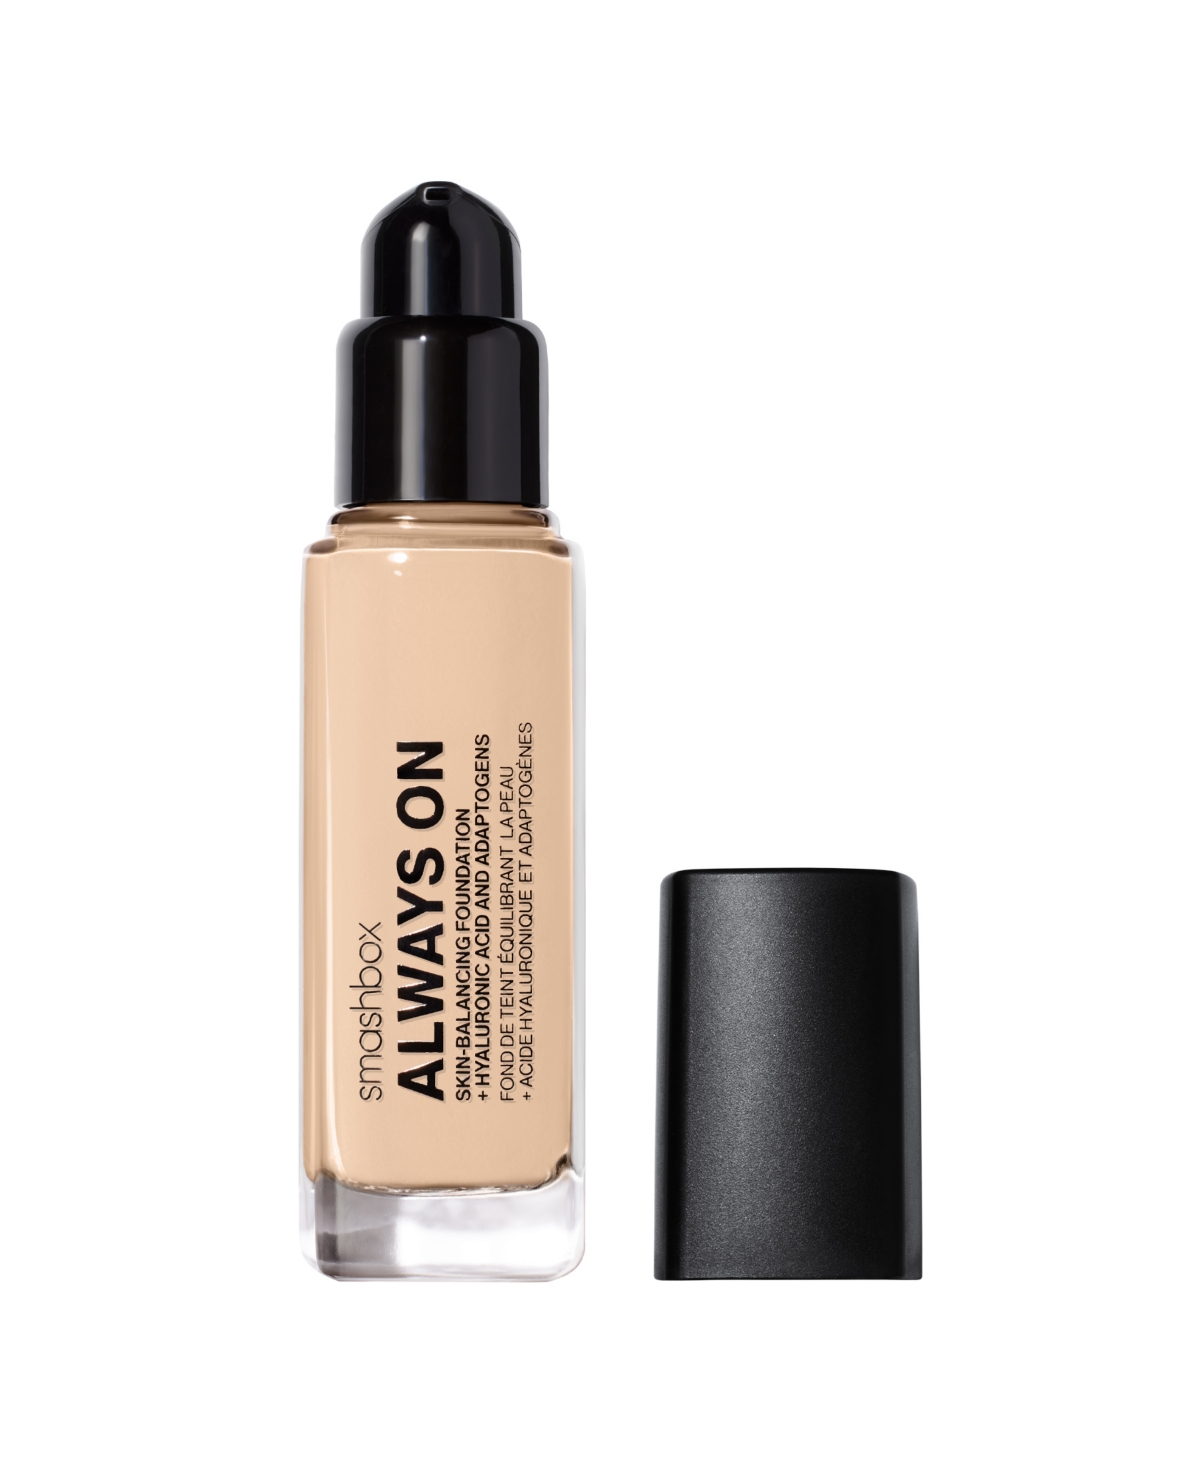 Smashbox Always On Skin-balancing Foundation, 1 Oz. In Ln (level-one Light With A Neutral Under